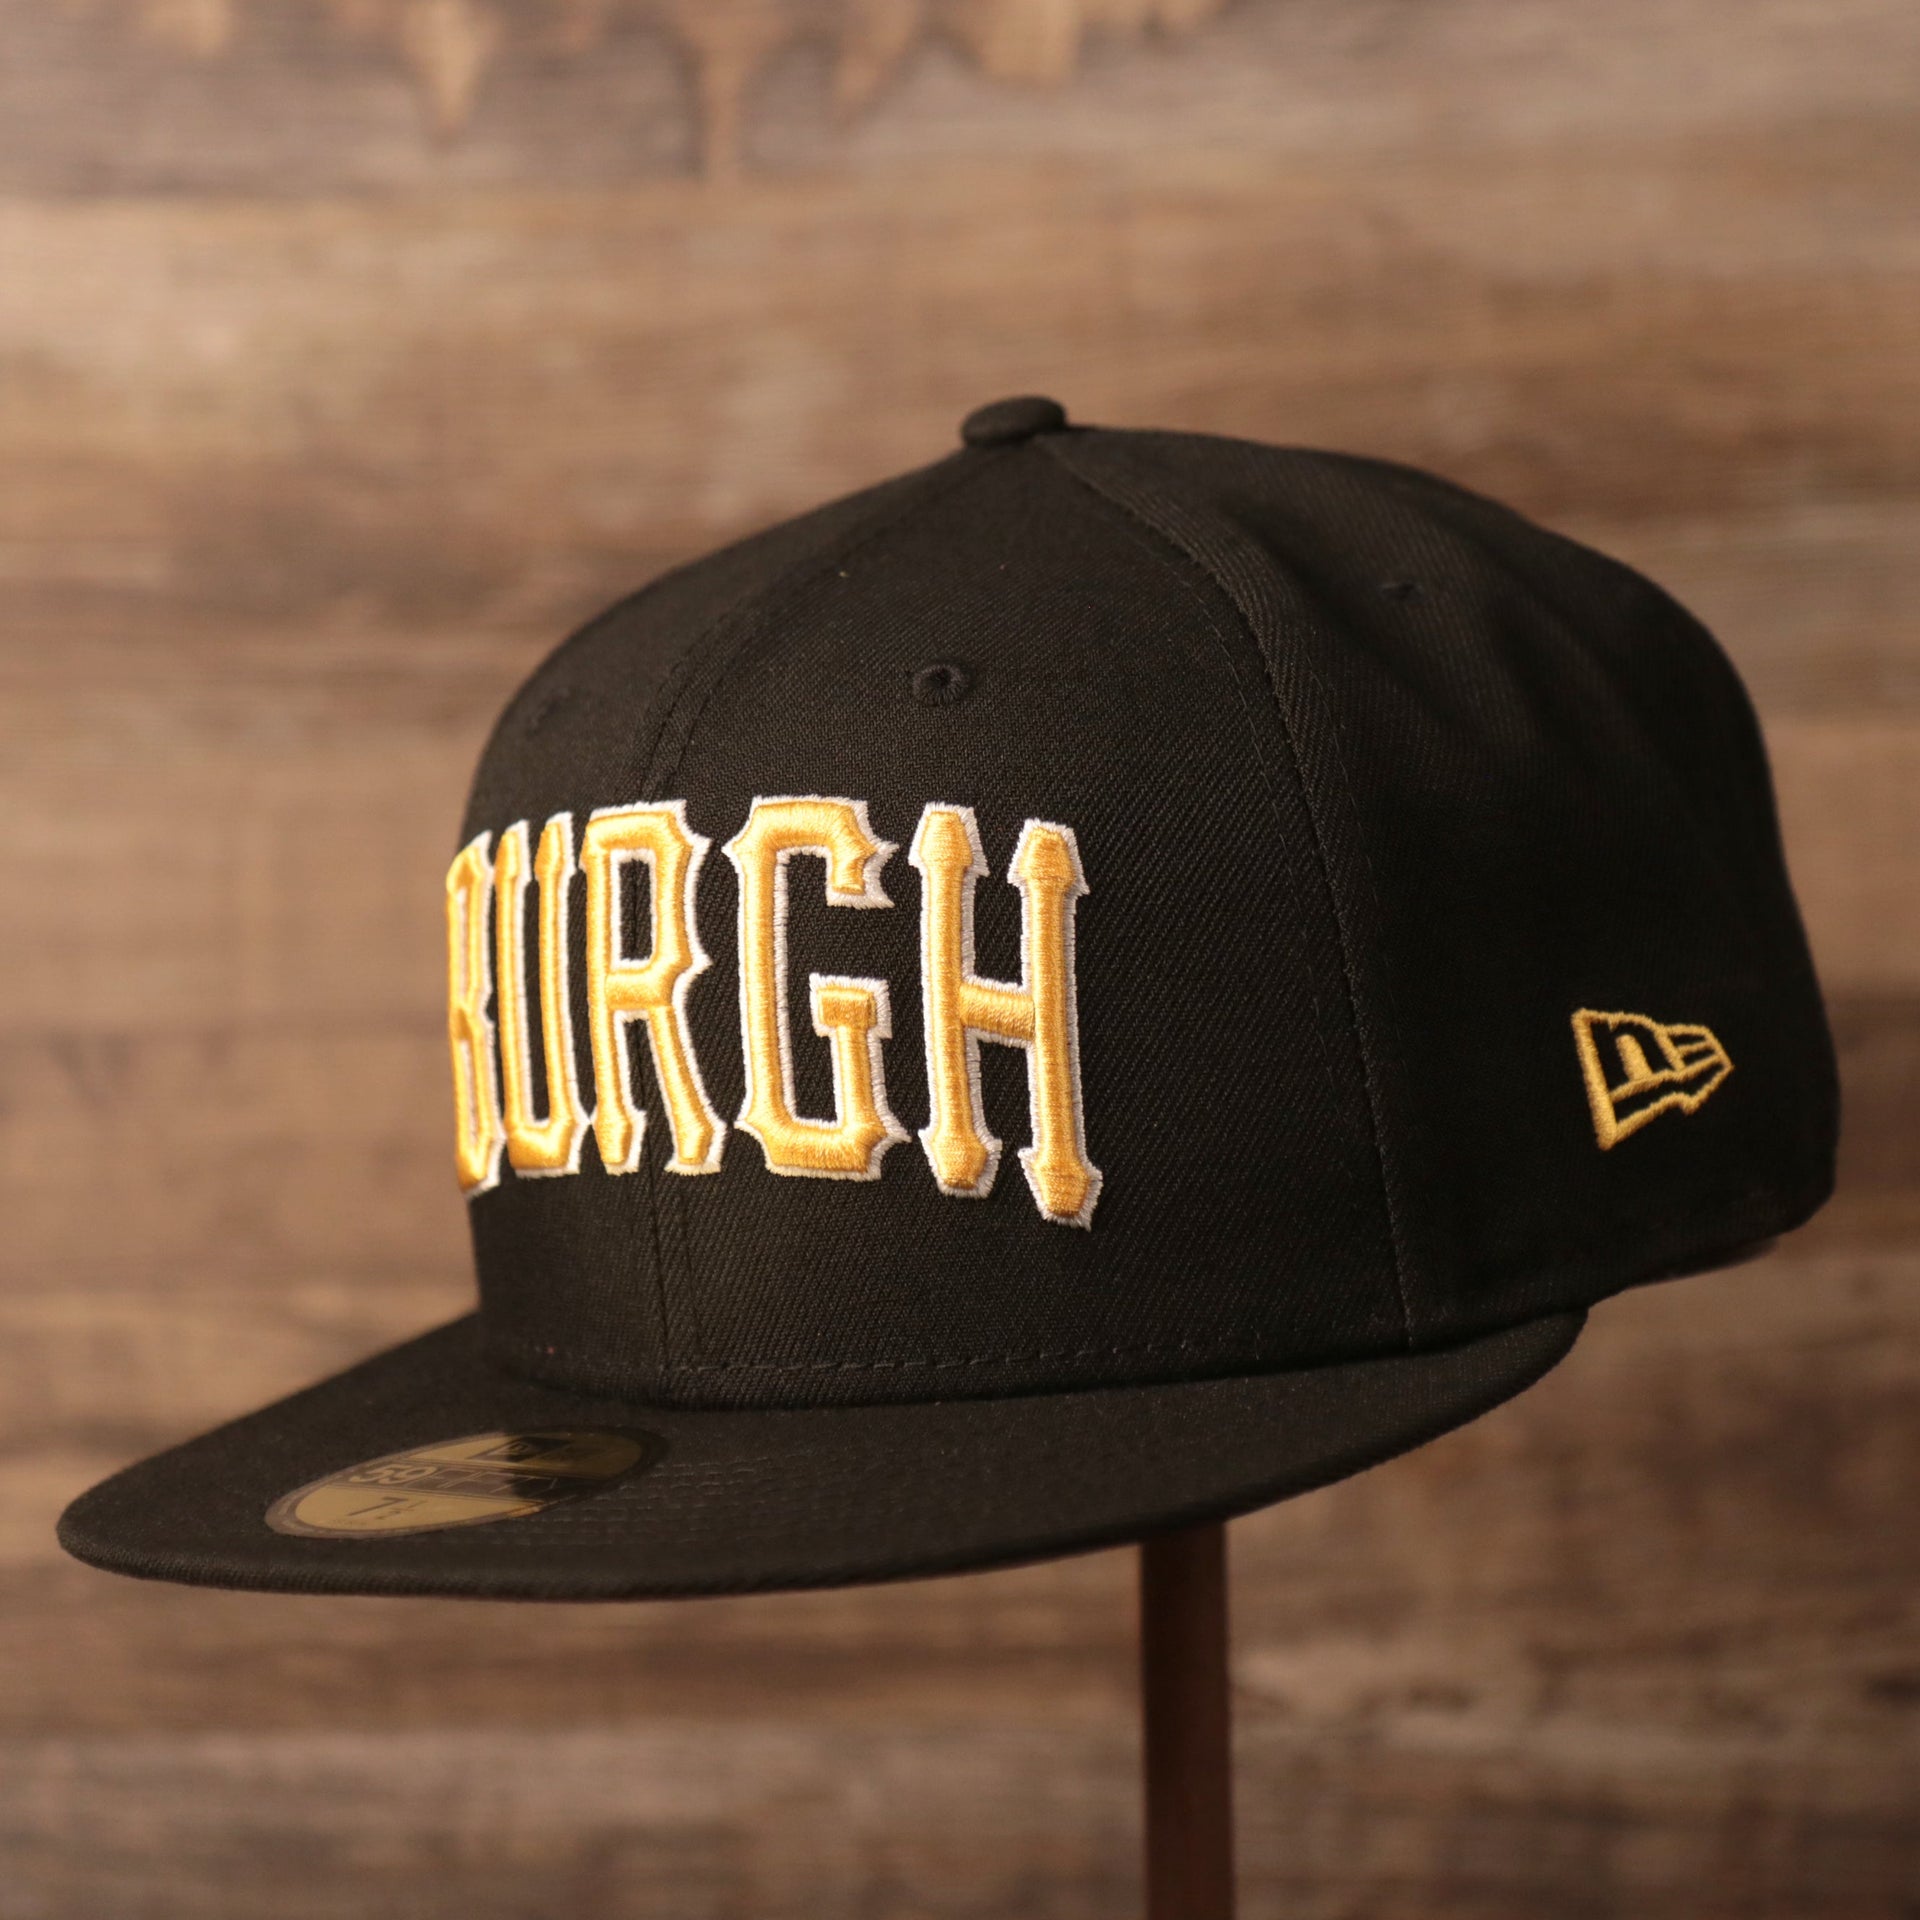 The Pittsburgh Pirates black all over patch fitted 59fifty by New Era.